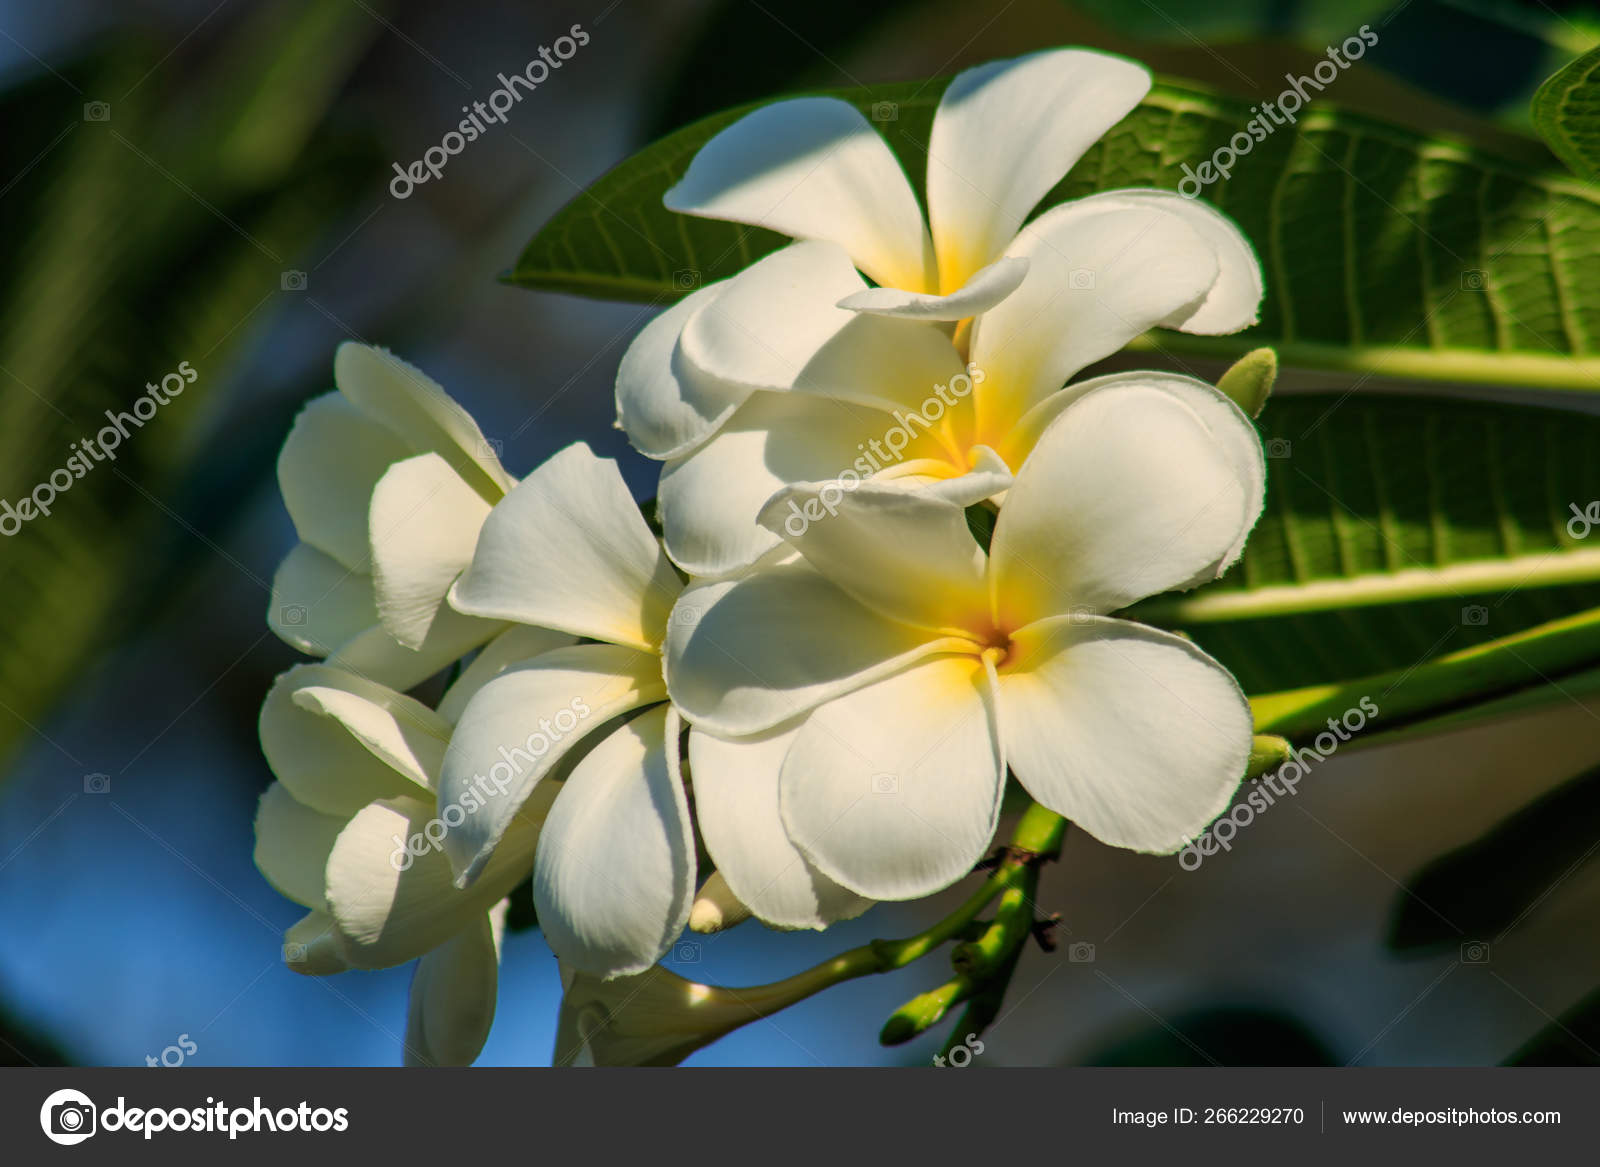 181 Lao National Flower Stock Photos Free Royalty Free Lao National Flower Images Depositphotos